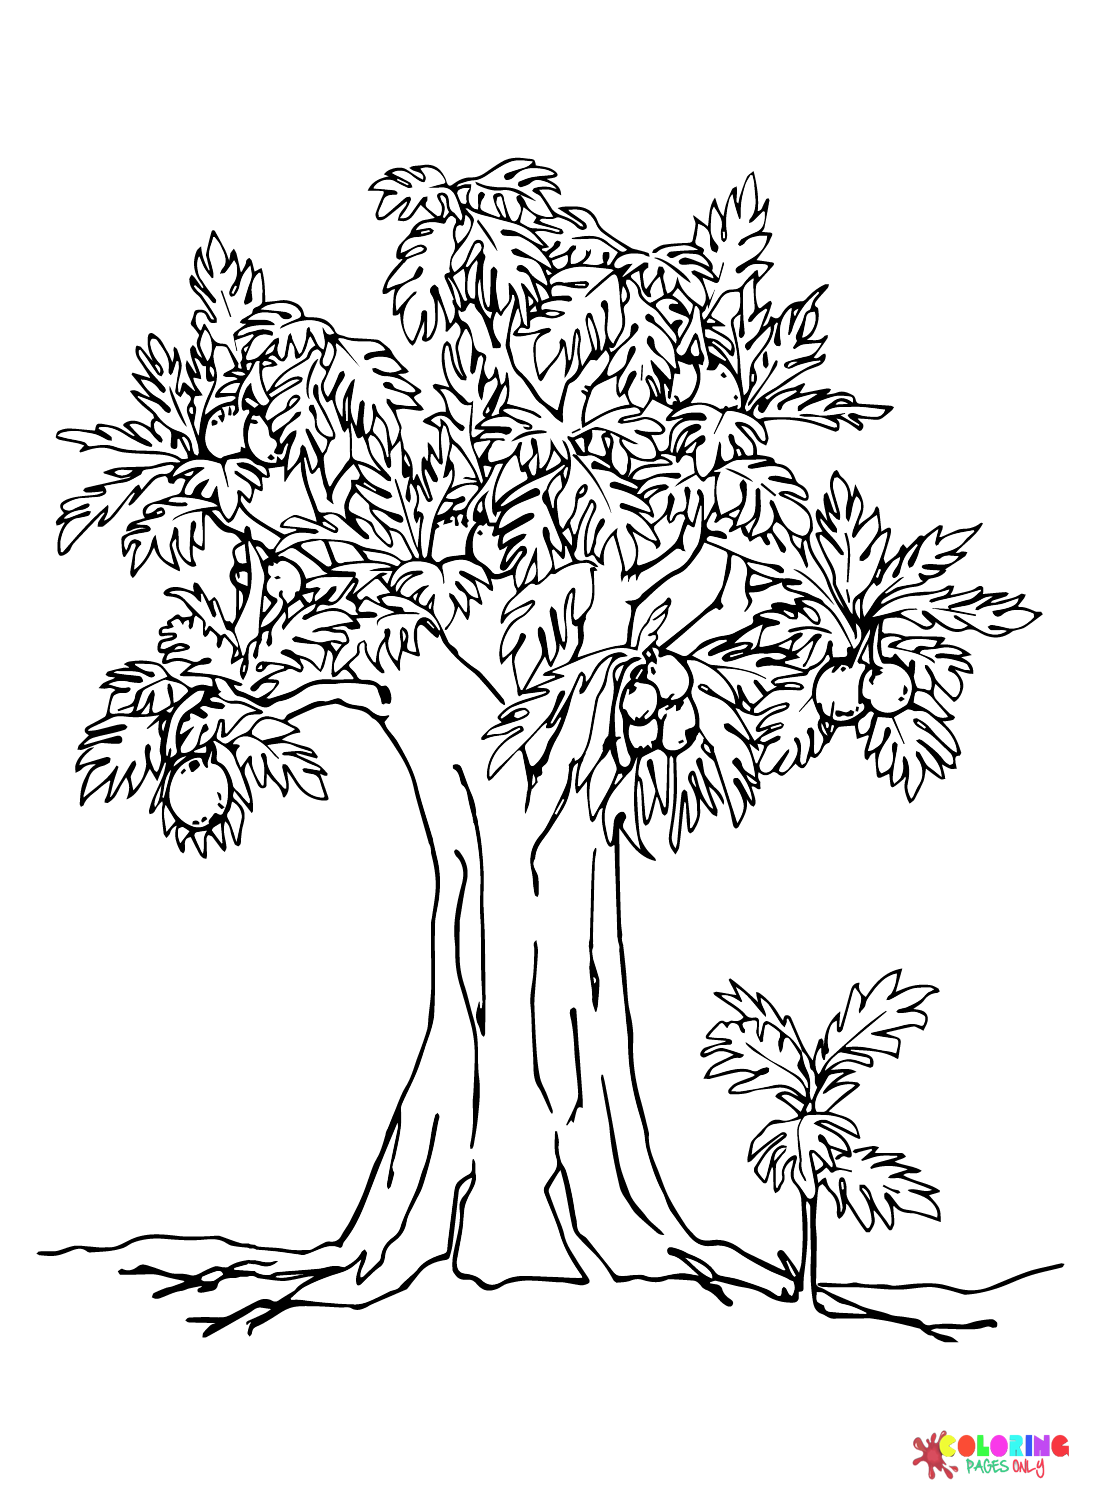 Breadfruit Tree Coloring Page